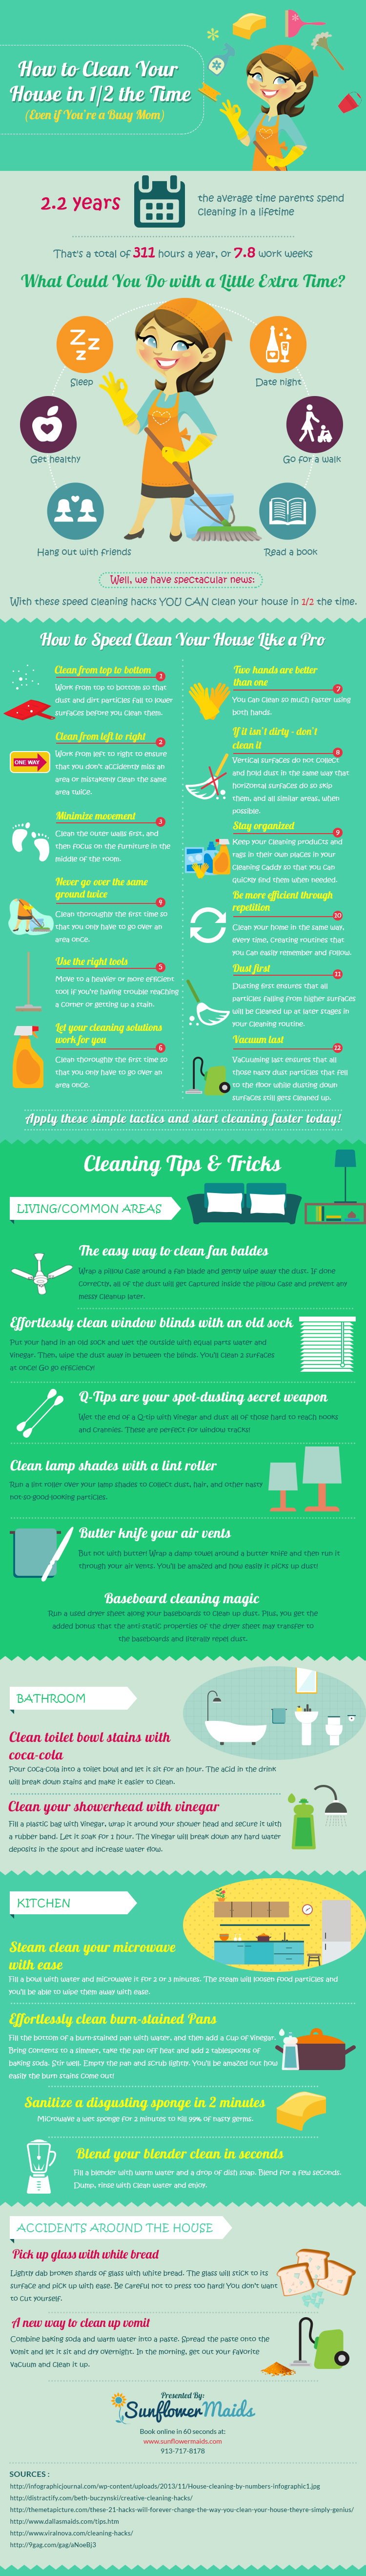 how-to-clean-your-house-in-half-the-time